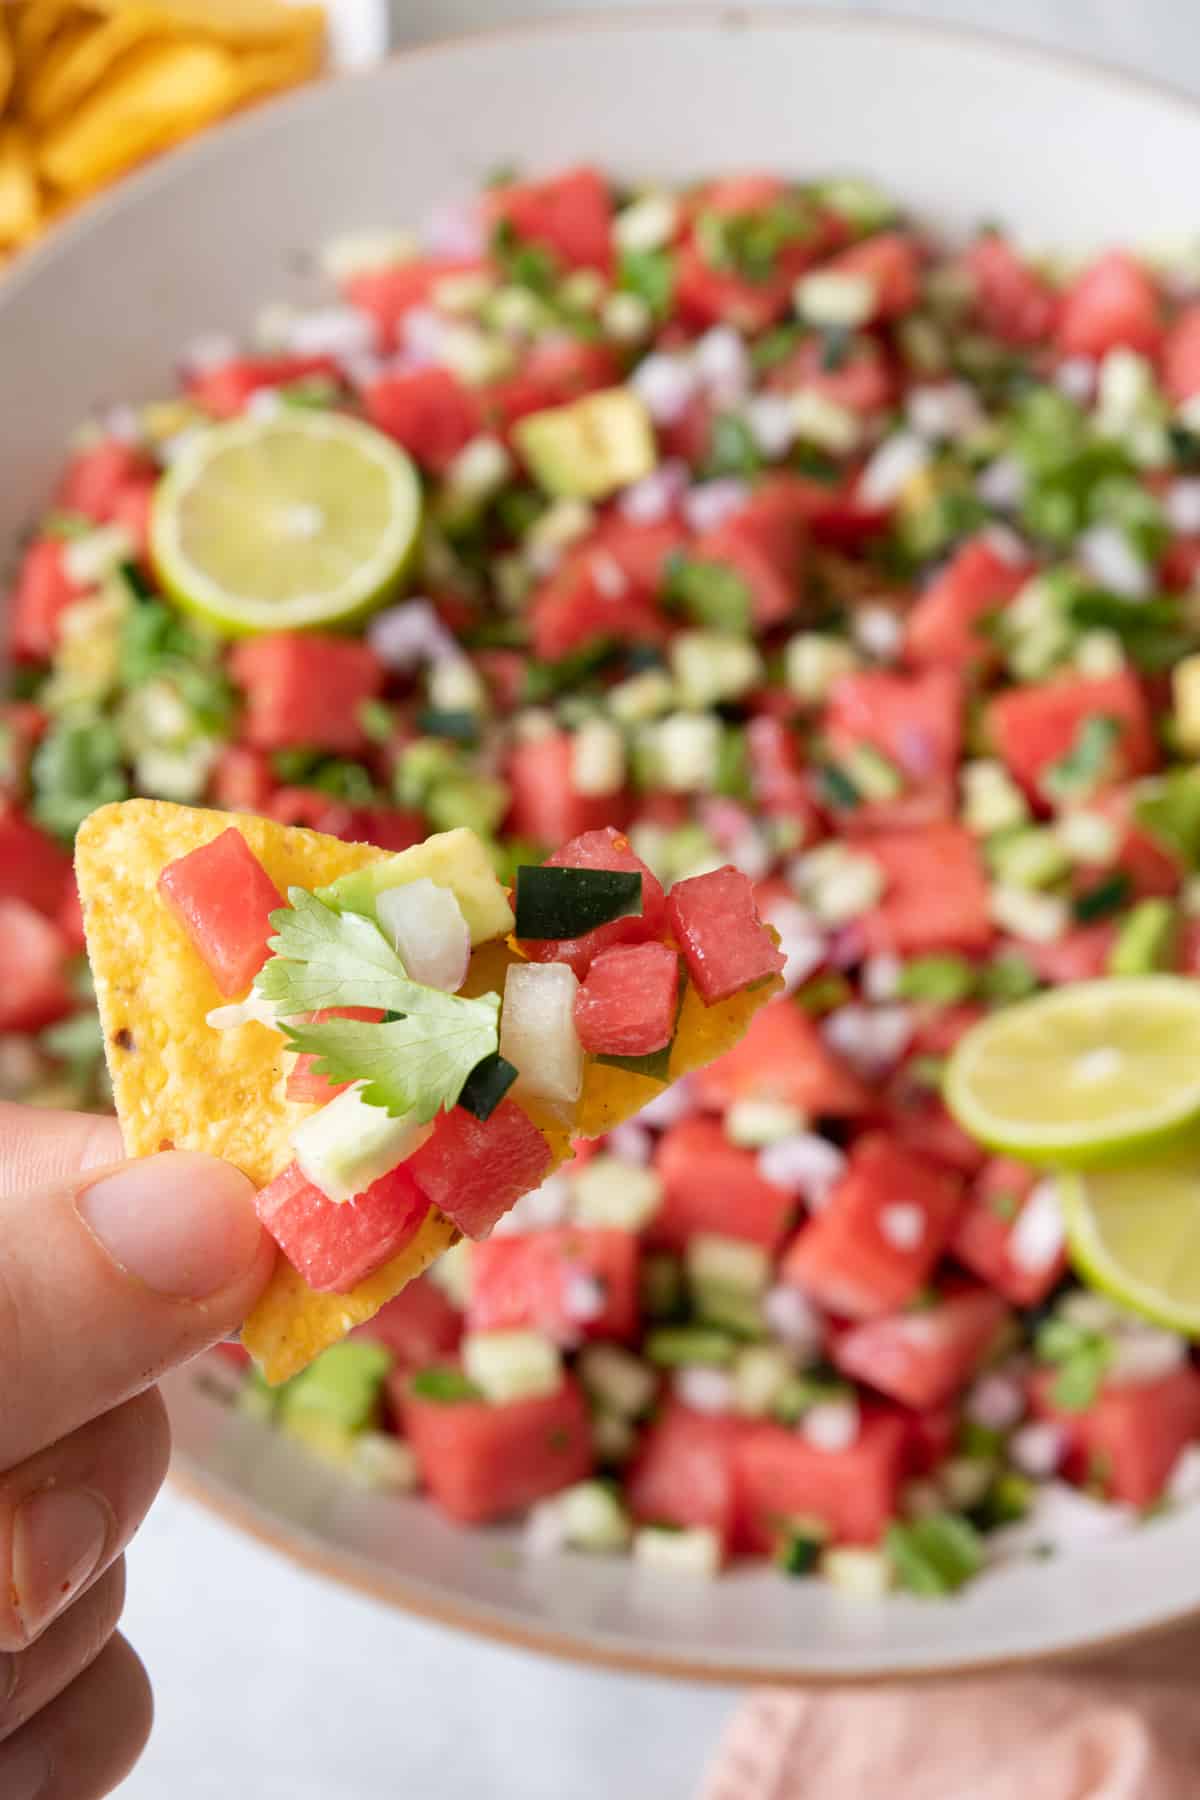 Hand holding tortilla chip loaded with watermelon salsa with large bowl of salsa below.